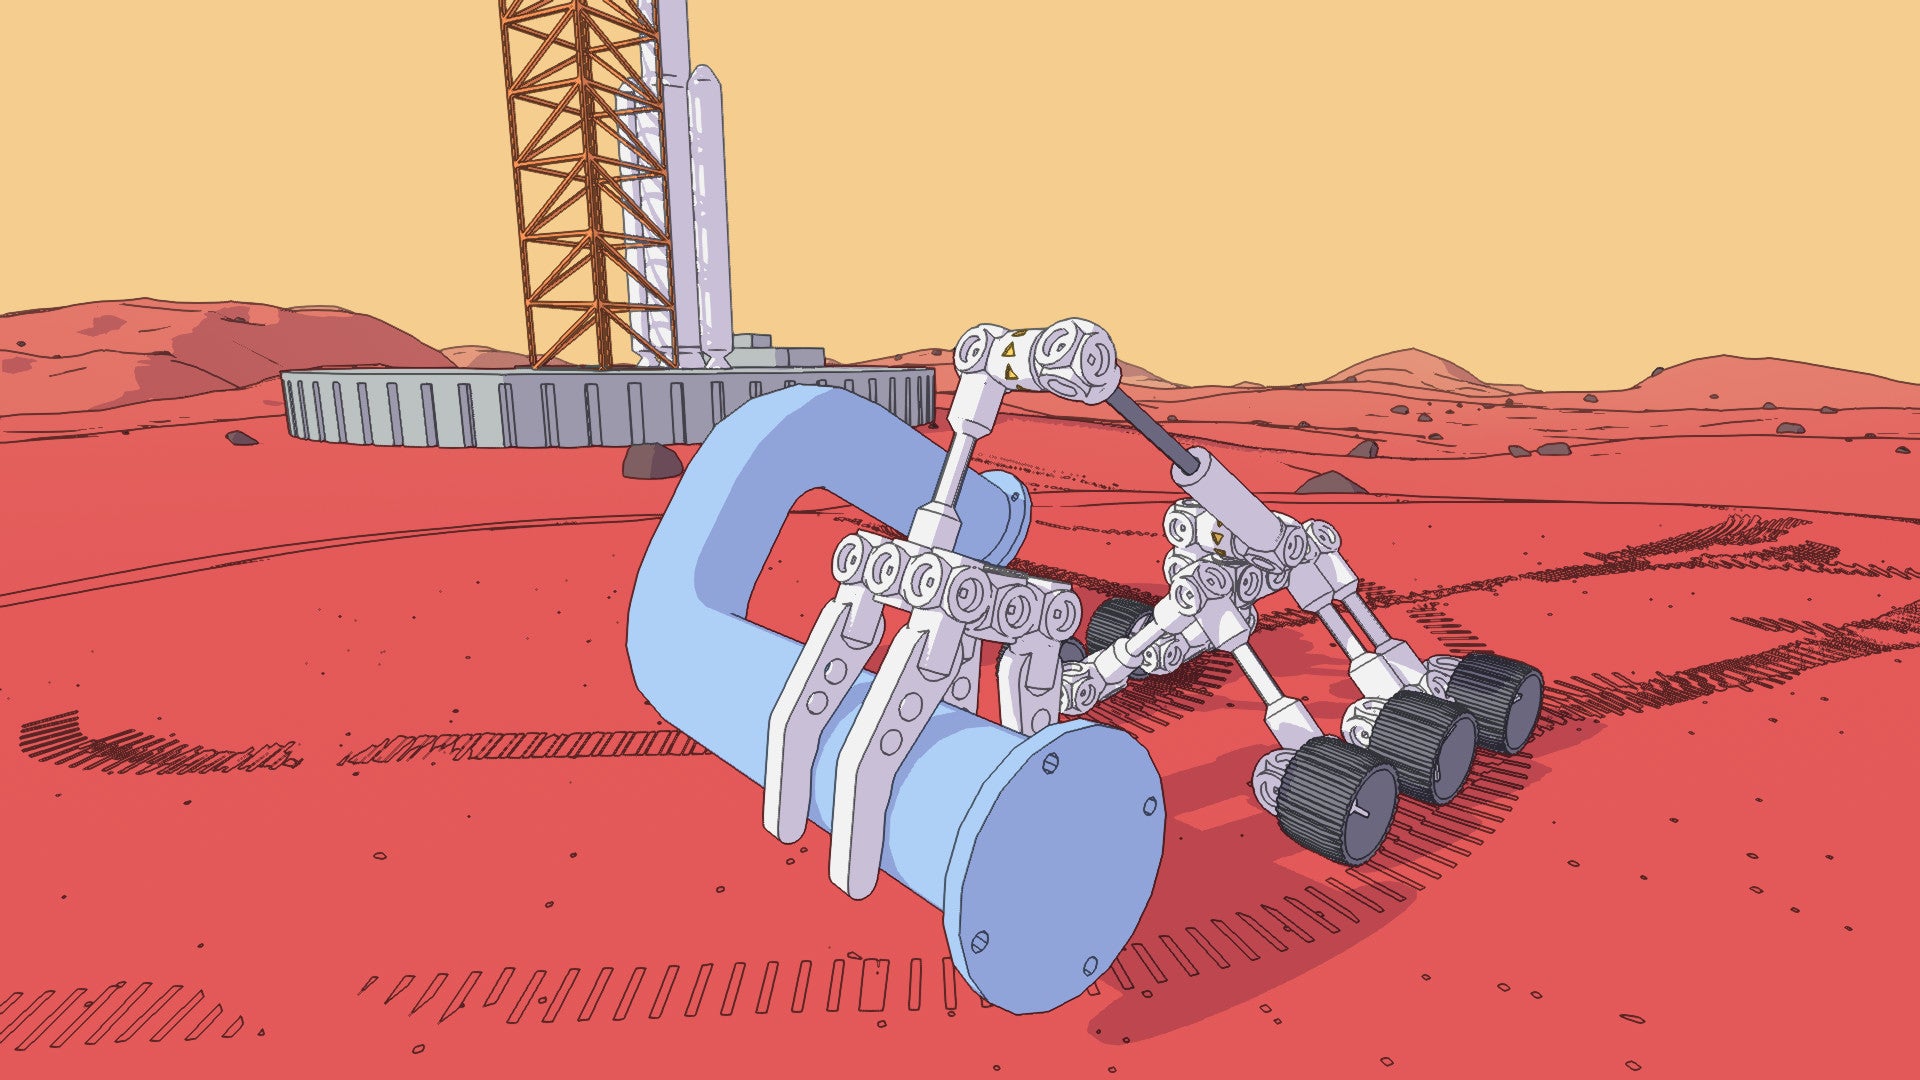 A screenshot of Mars First Logistics showing a six-wheeled robot with a large arm carrying a pipe across the red surface of Mars.